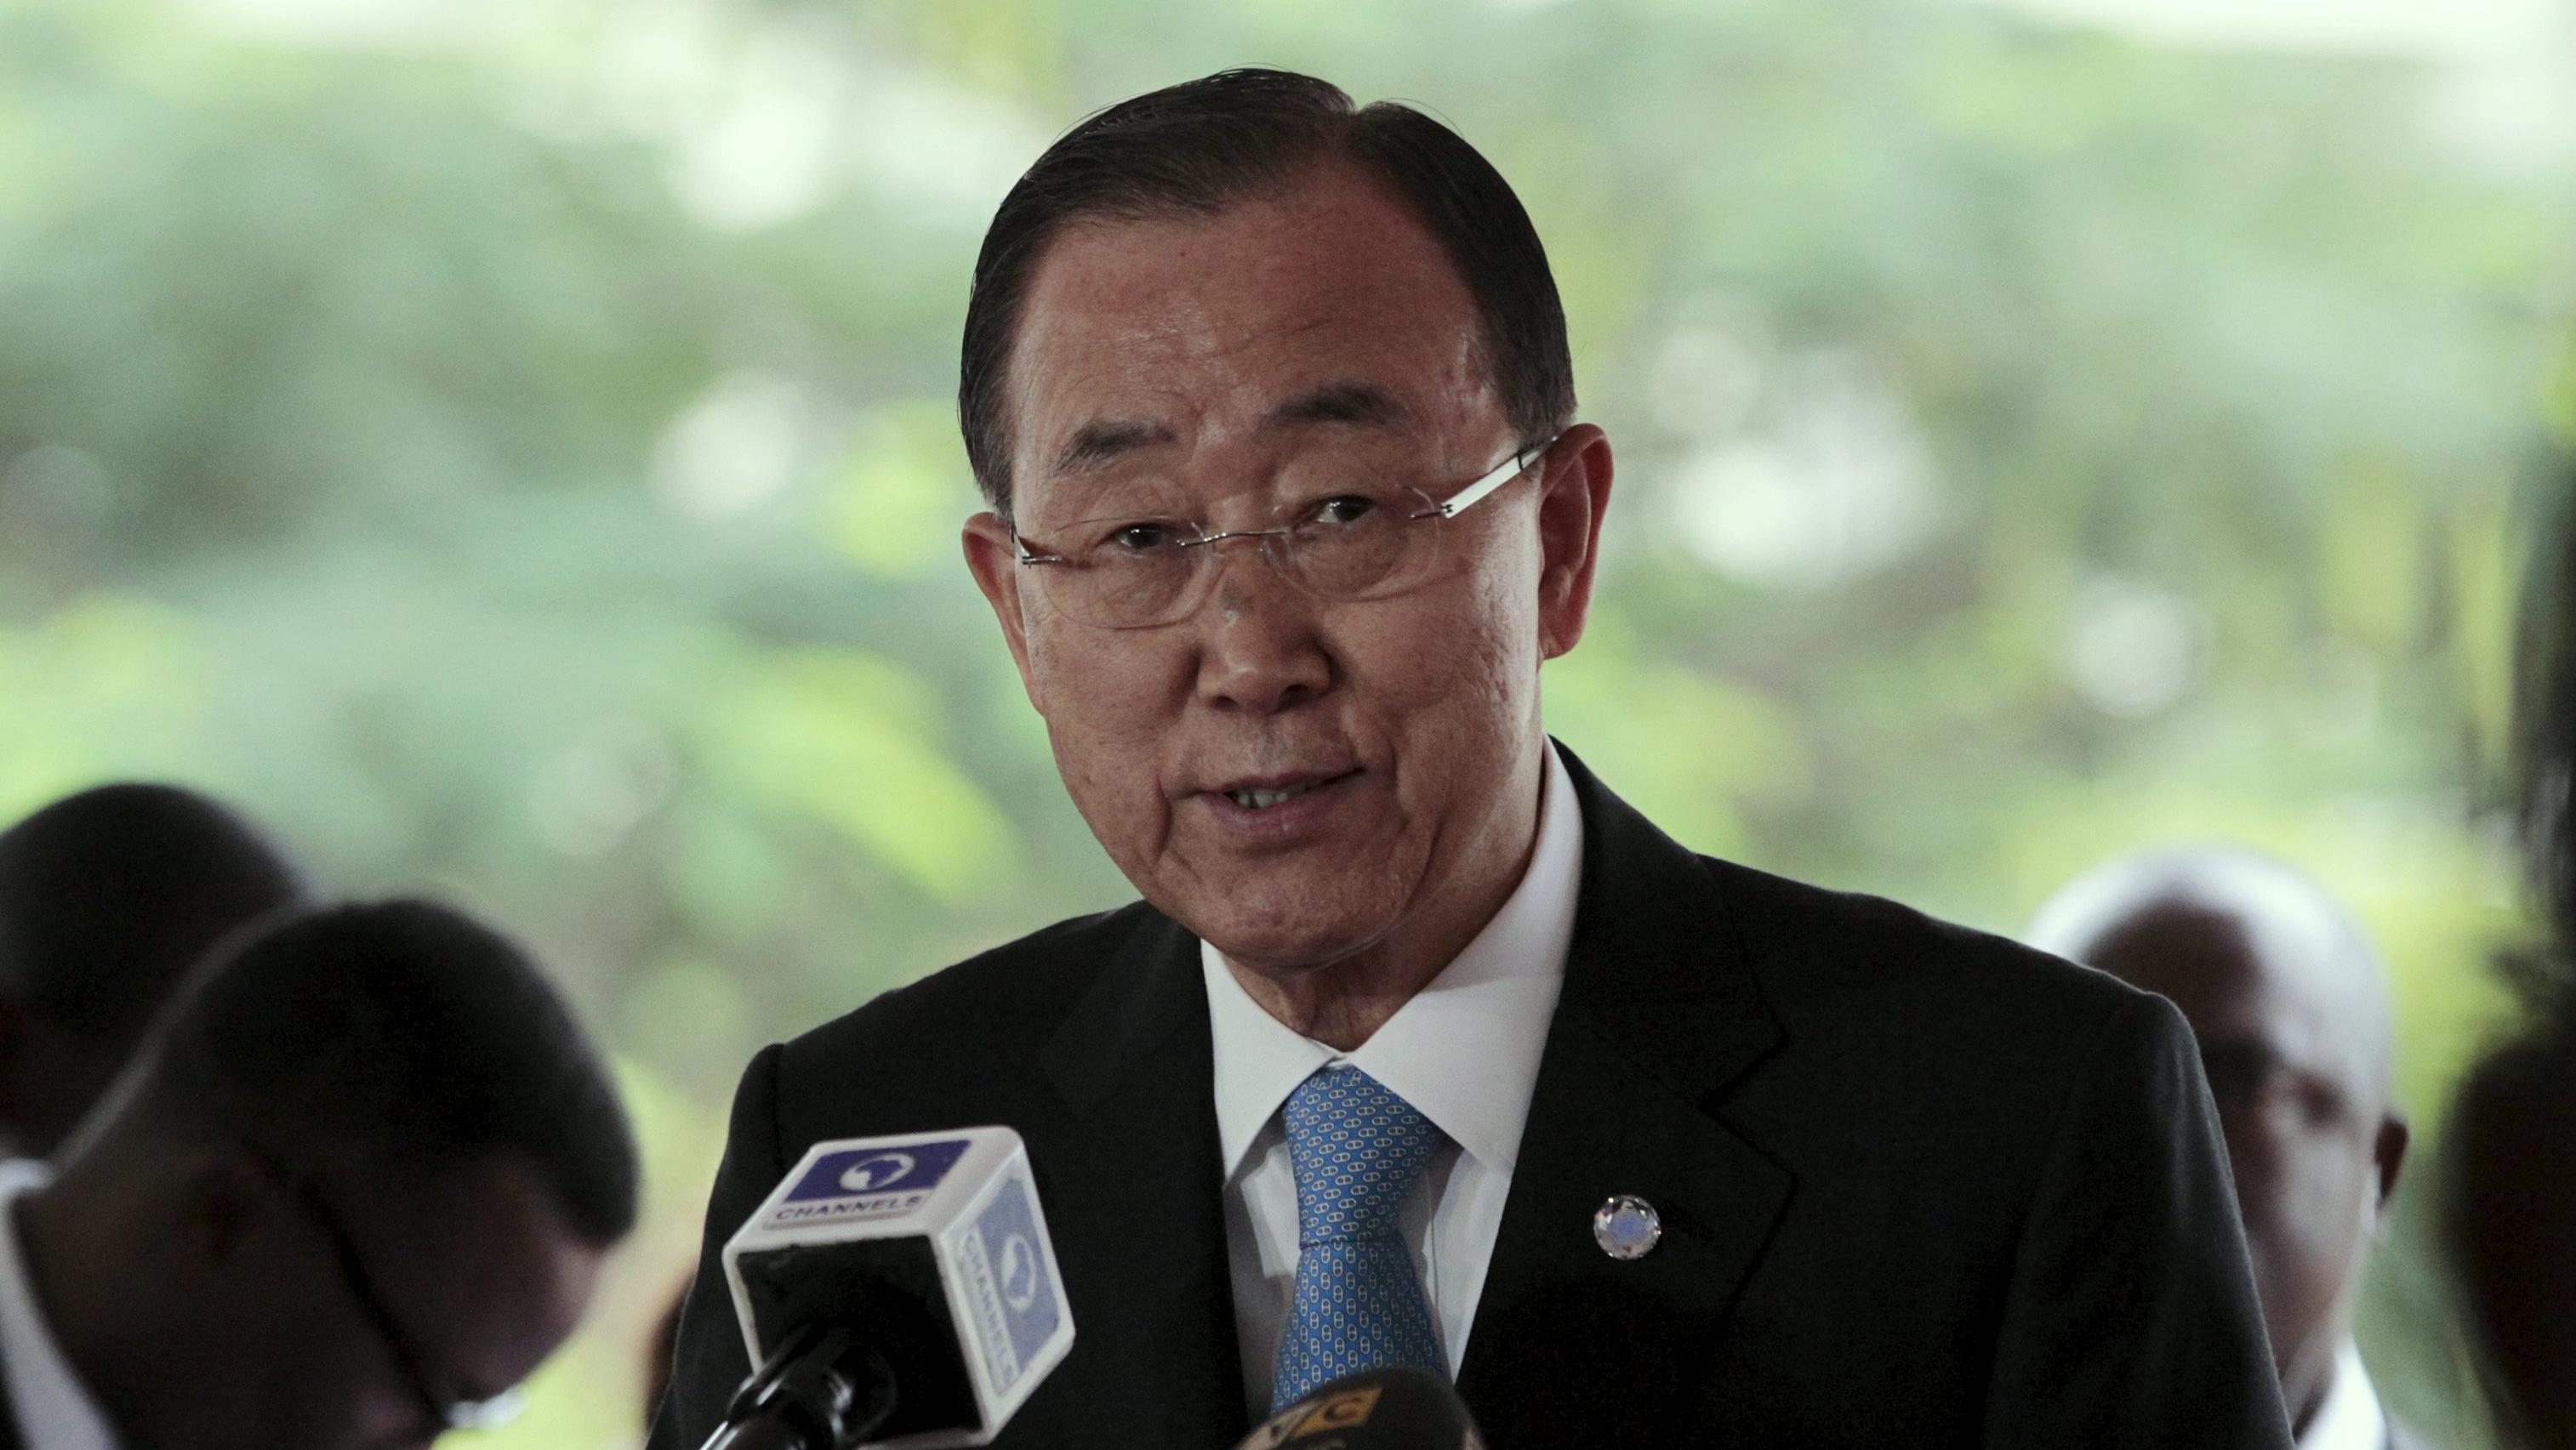 U.N. Secretary General Ban Ki-moon, speaks during an event marking 4th anniversary of the bombing of the Abuja United Nations building by Boko Haram members in Abuja, Nigeria, August 24, 2015.